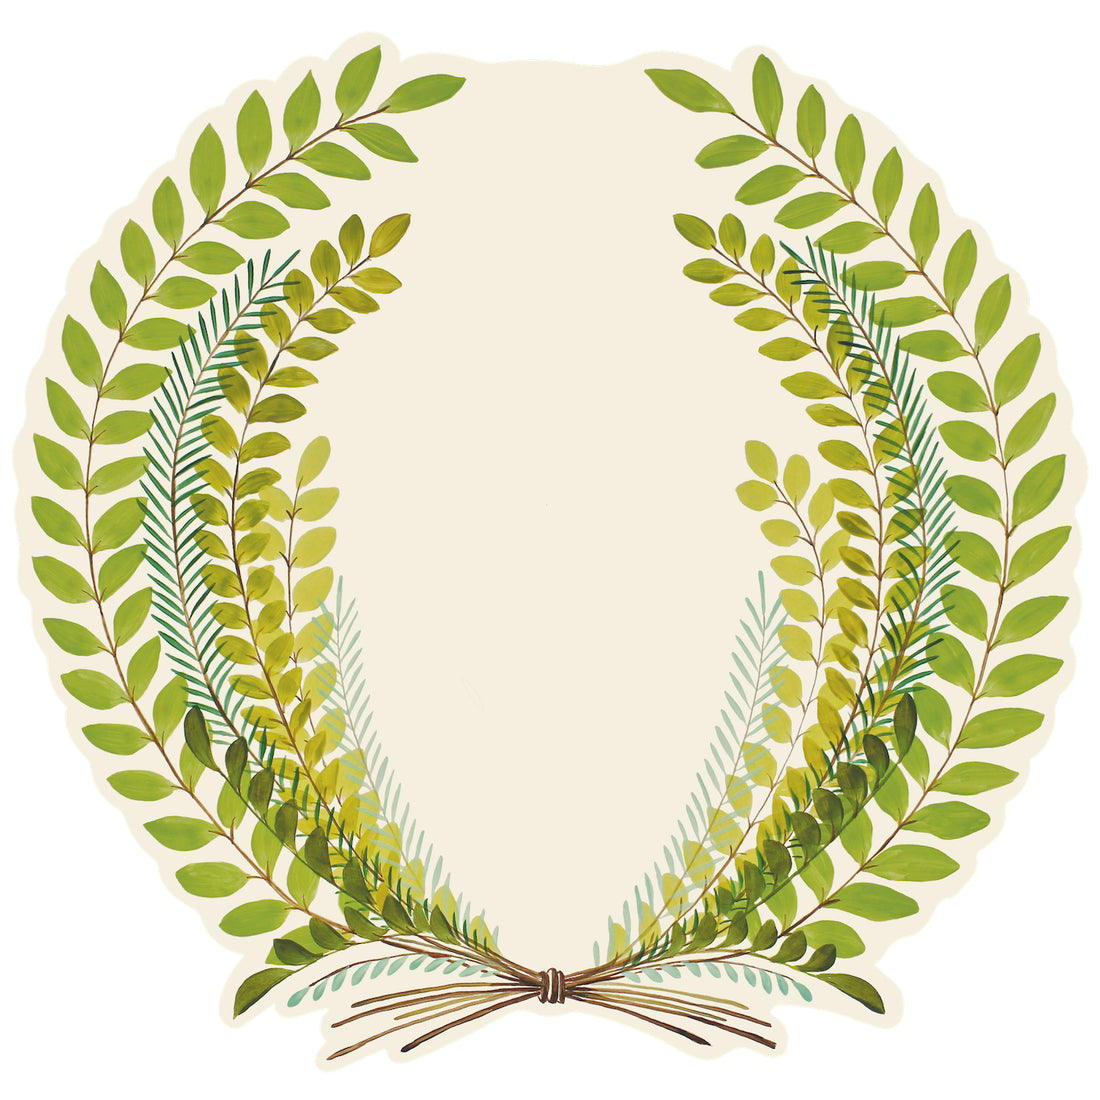 An illustrated, symmetrical wreath of different leafy sprigs with stems tied together at the bottom, leaving an open white background in the middle.